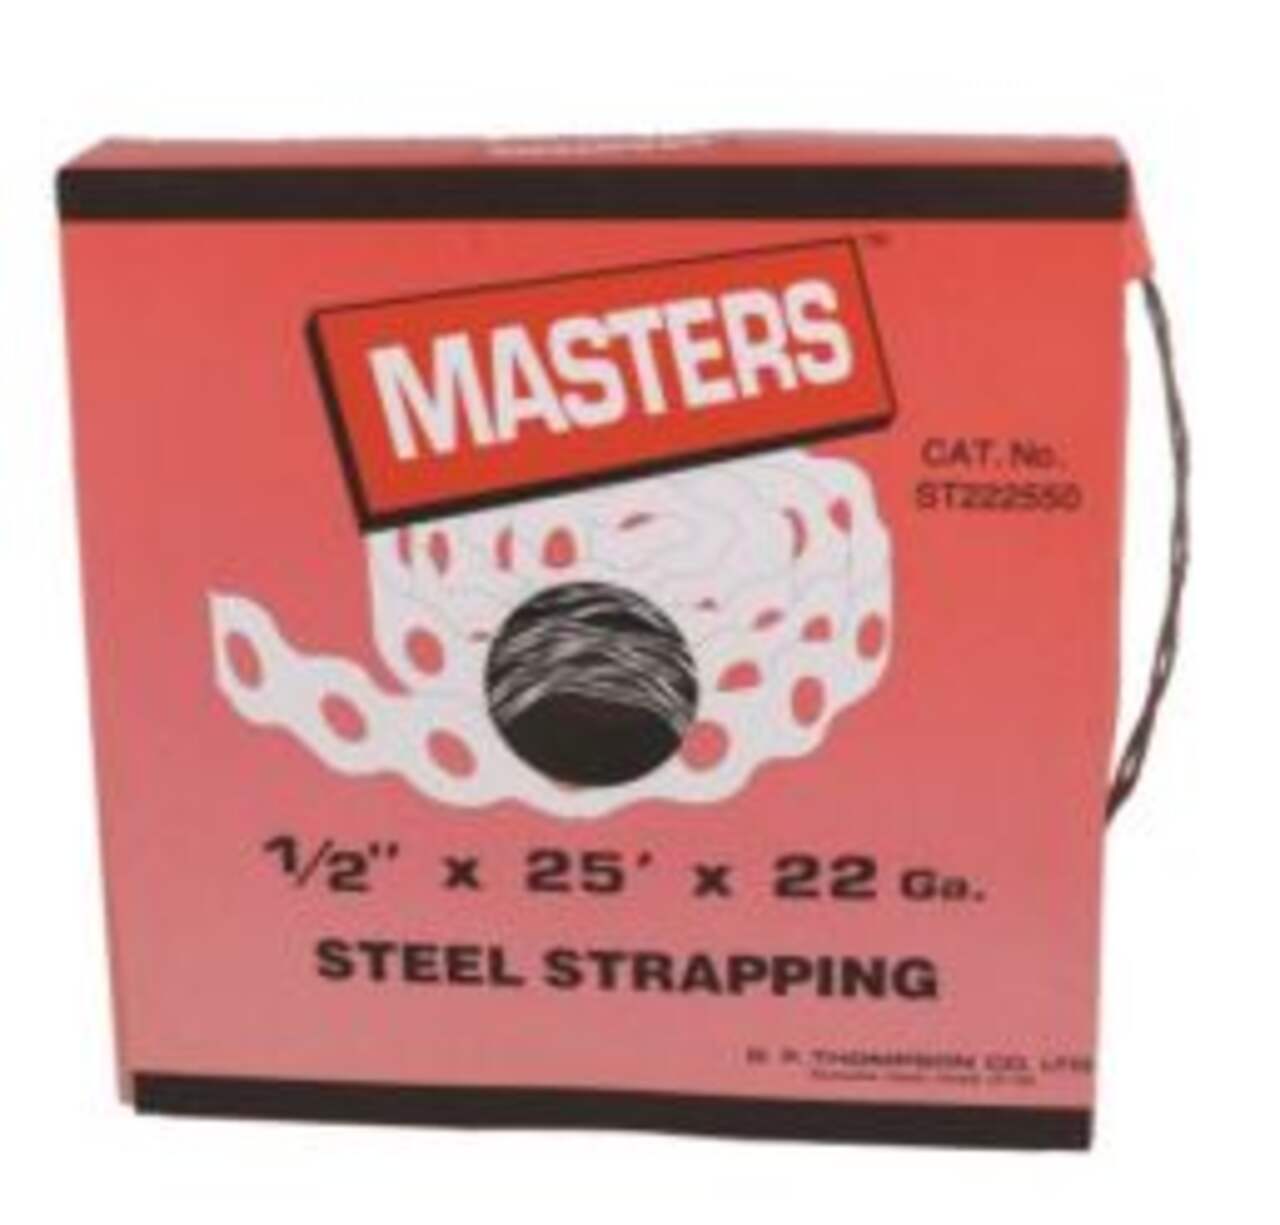 MASTERS All Round Steel Strapping to Hang Pipes, 1/2-in x 25-ft